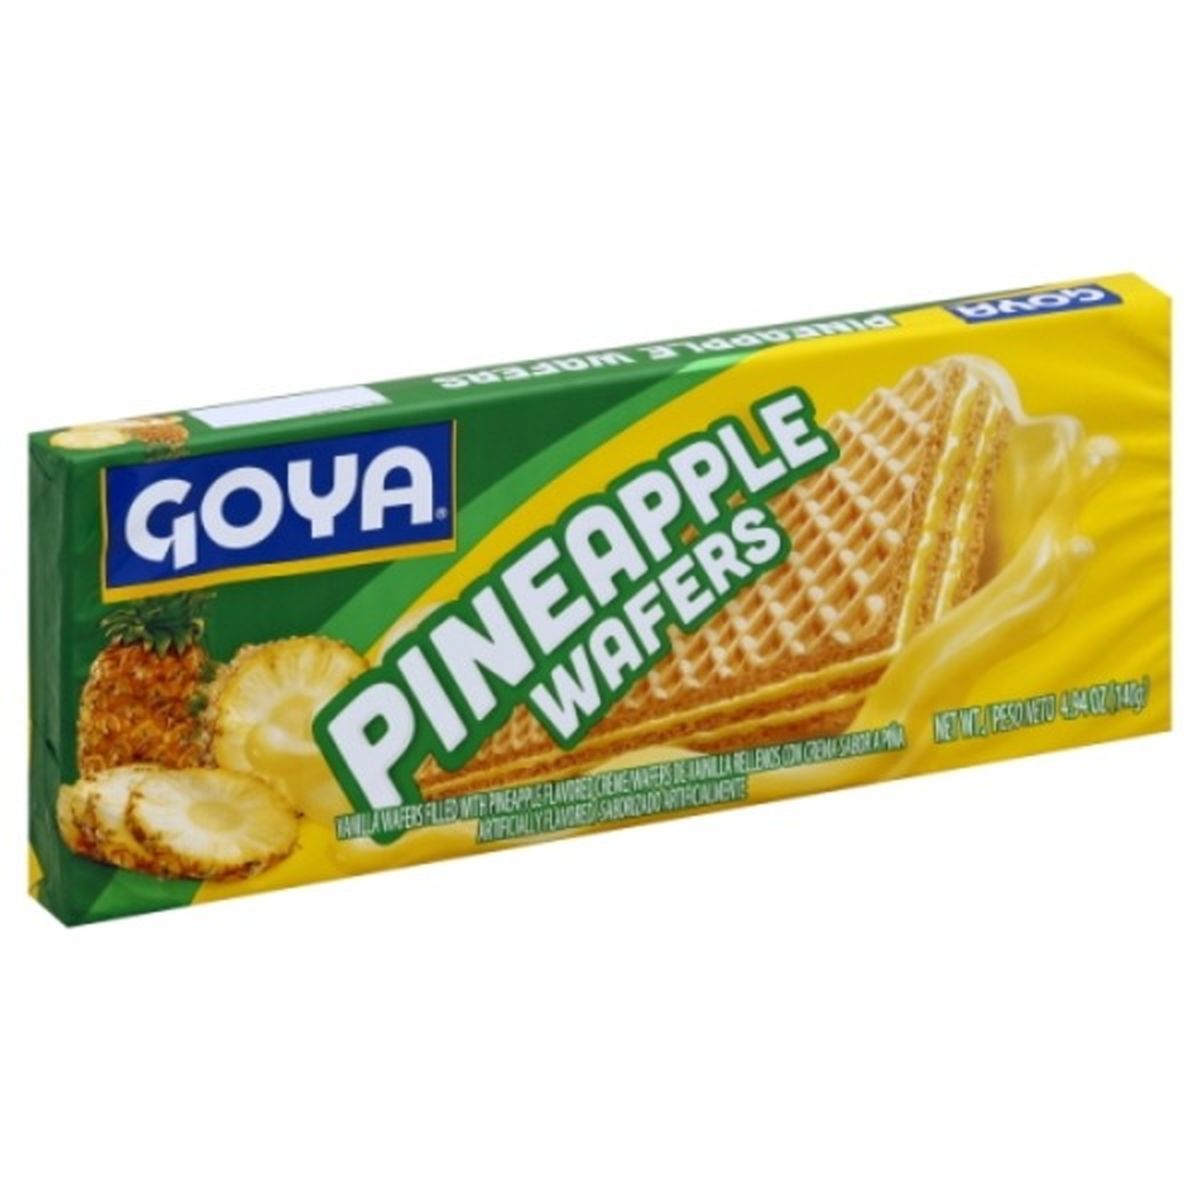 Calories in Goya Wafers, Pineapple